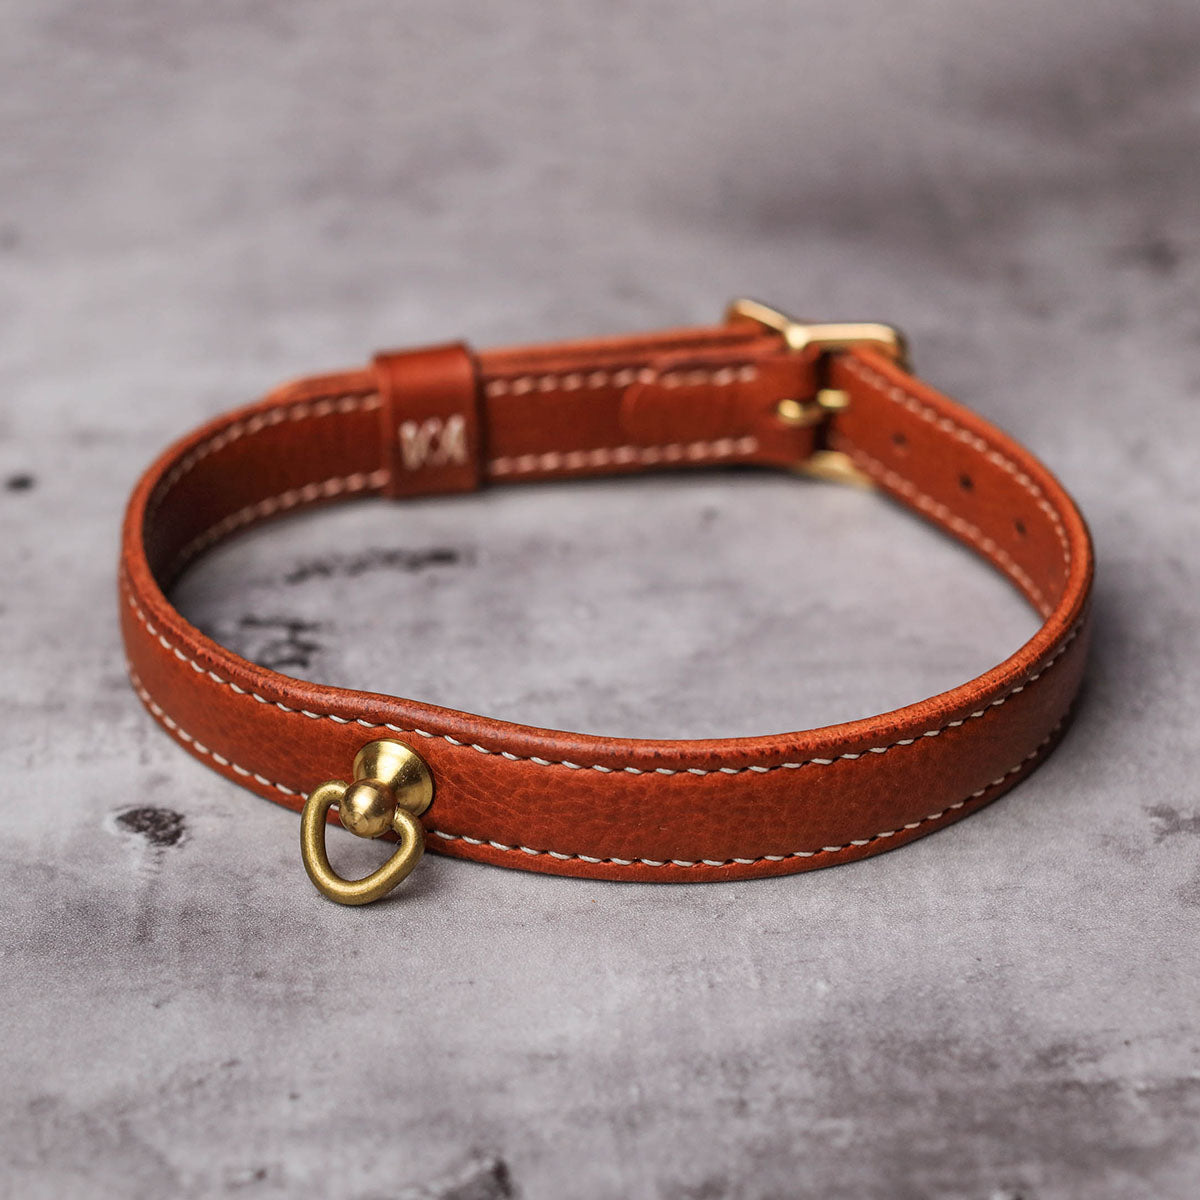 Italian M-Box Vegetable-Tanned Leather Collar/Choker with Leash